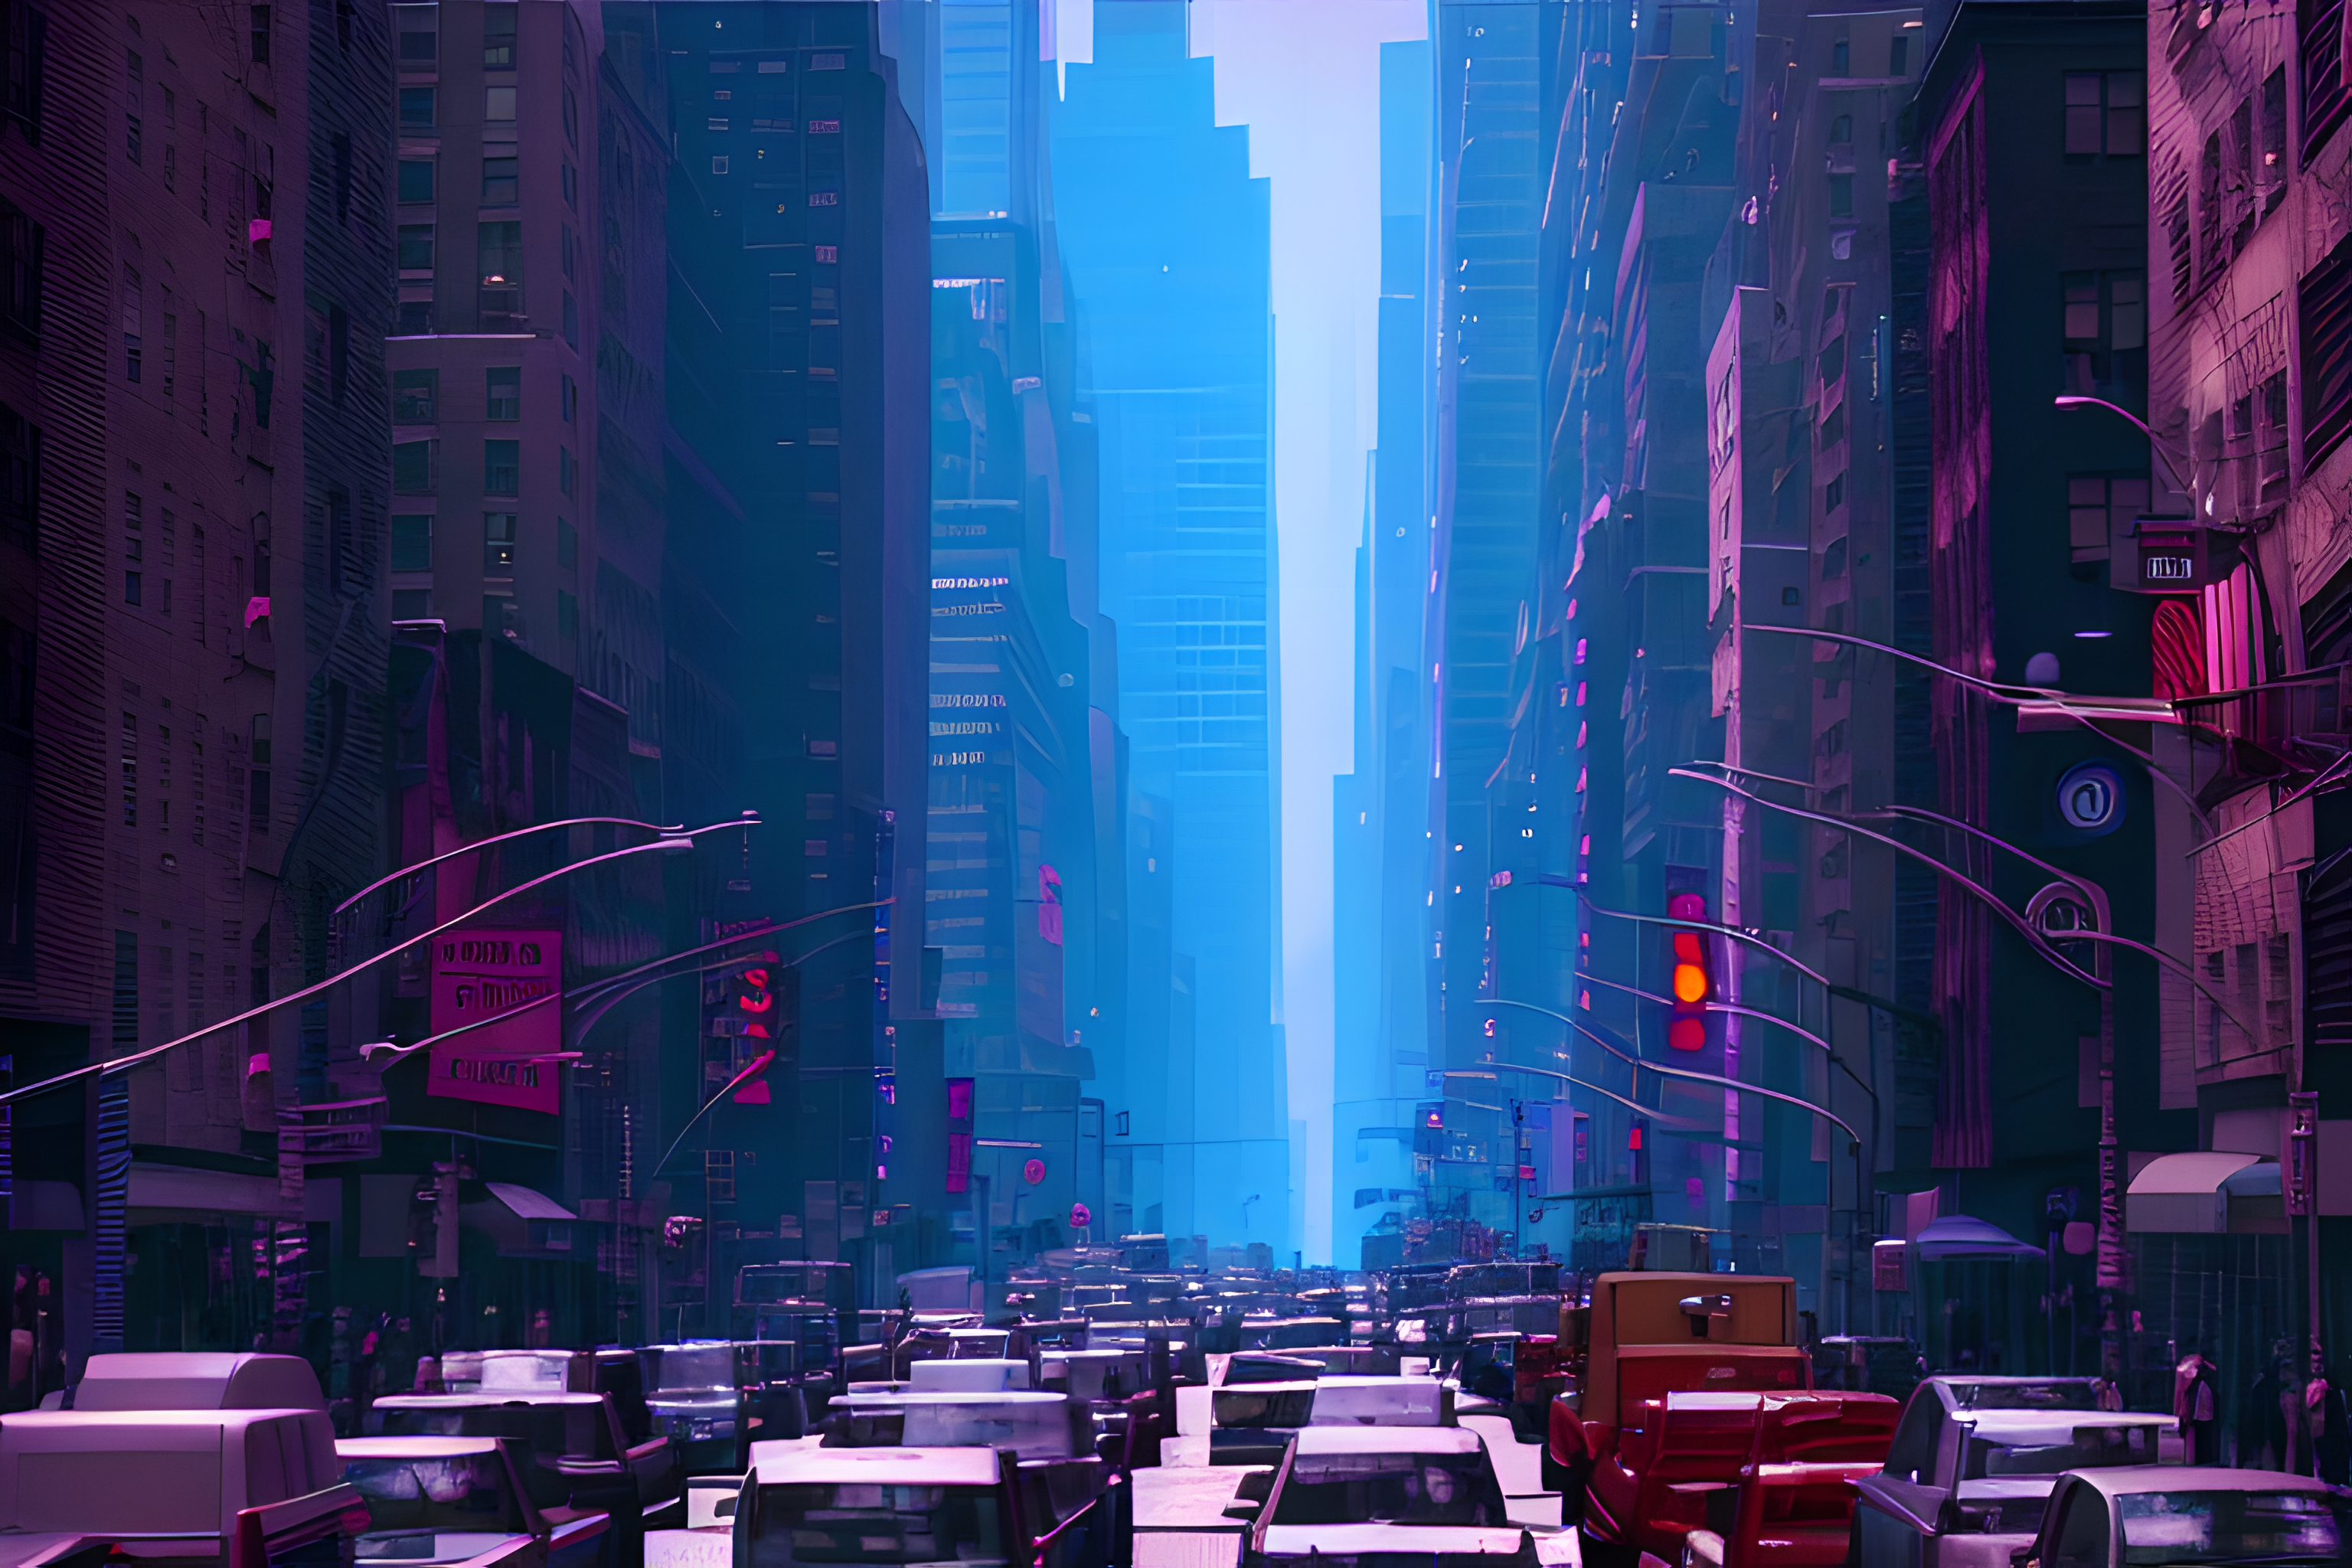 General 3072x2048 Spider-Verse spiderverse Spider-Man: Into the Spider-Verse Spiderman Miles Morales New York City Stable Diffusion city car traffic AI art Brooklyn